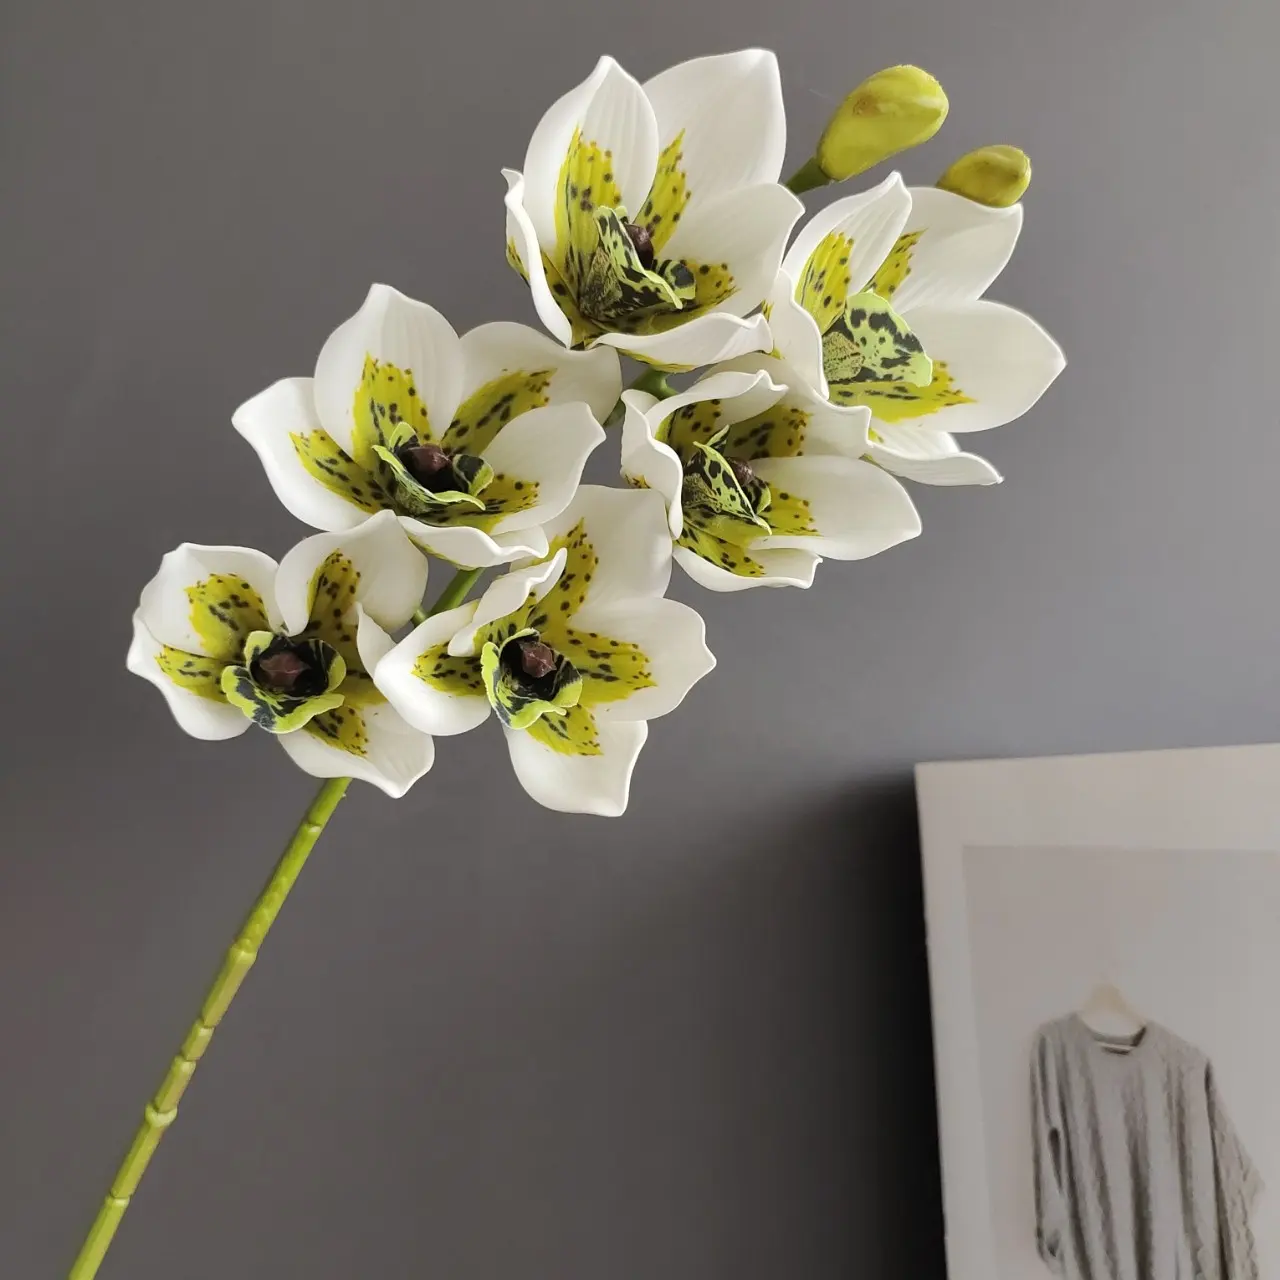 KEWEI-J636 3D Flowers White Real Touch Artificial Species Orchid Flowers Real Touch Latex Orchid Plants